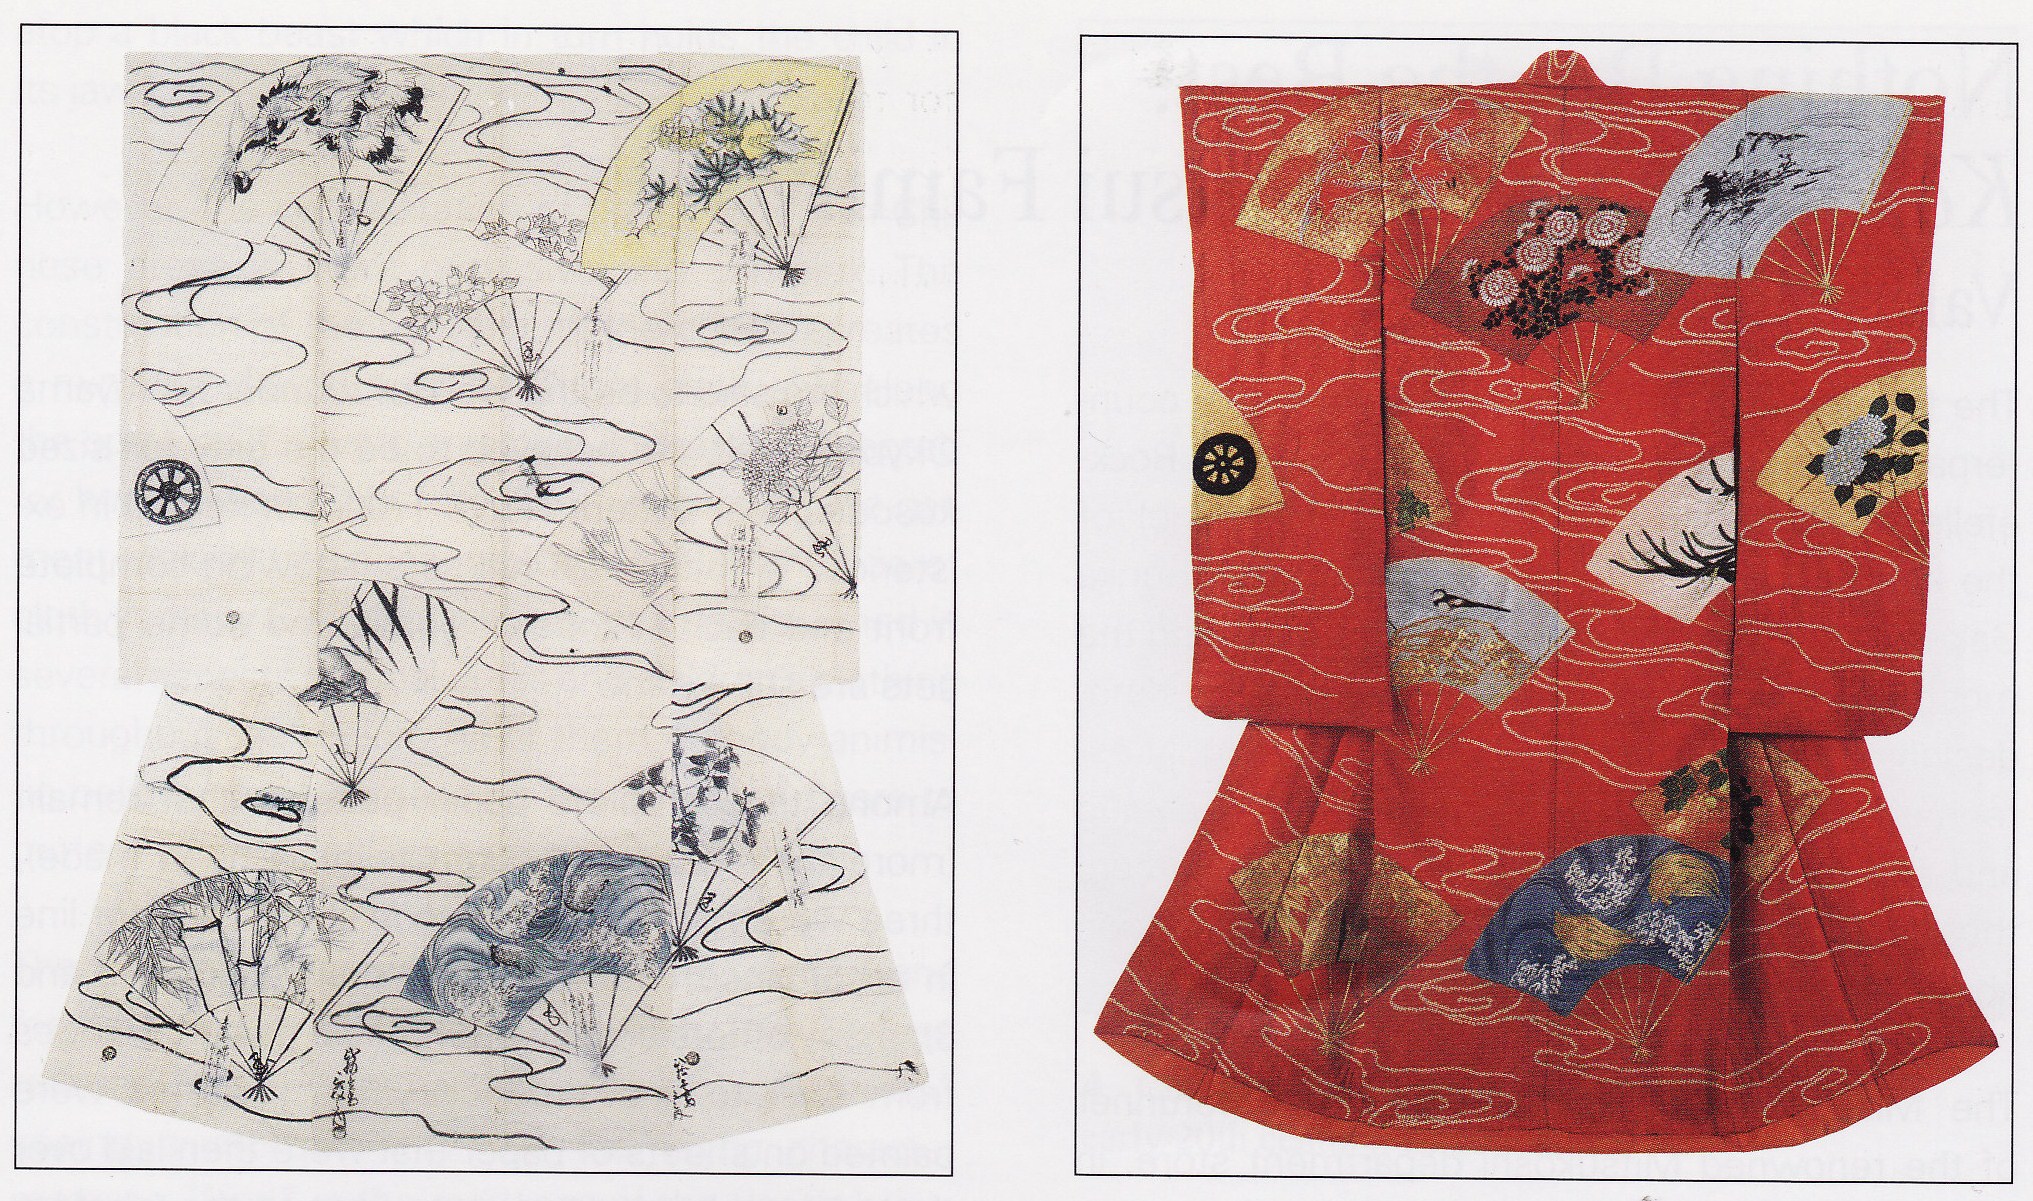 Uchikake and pattern from Mitsui collection